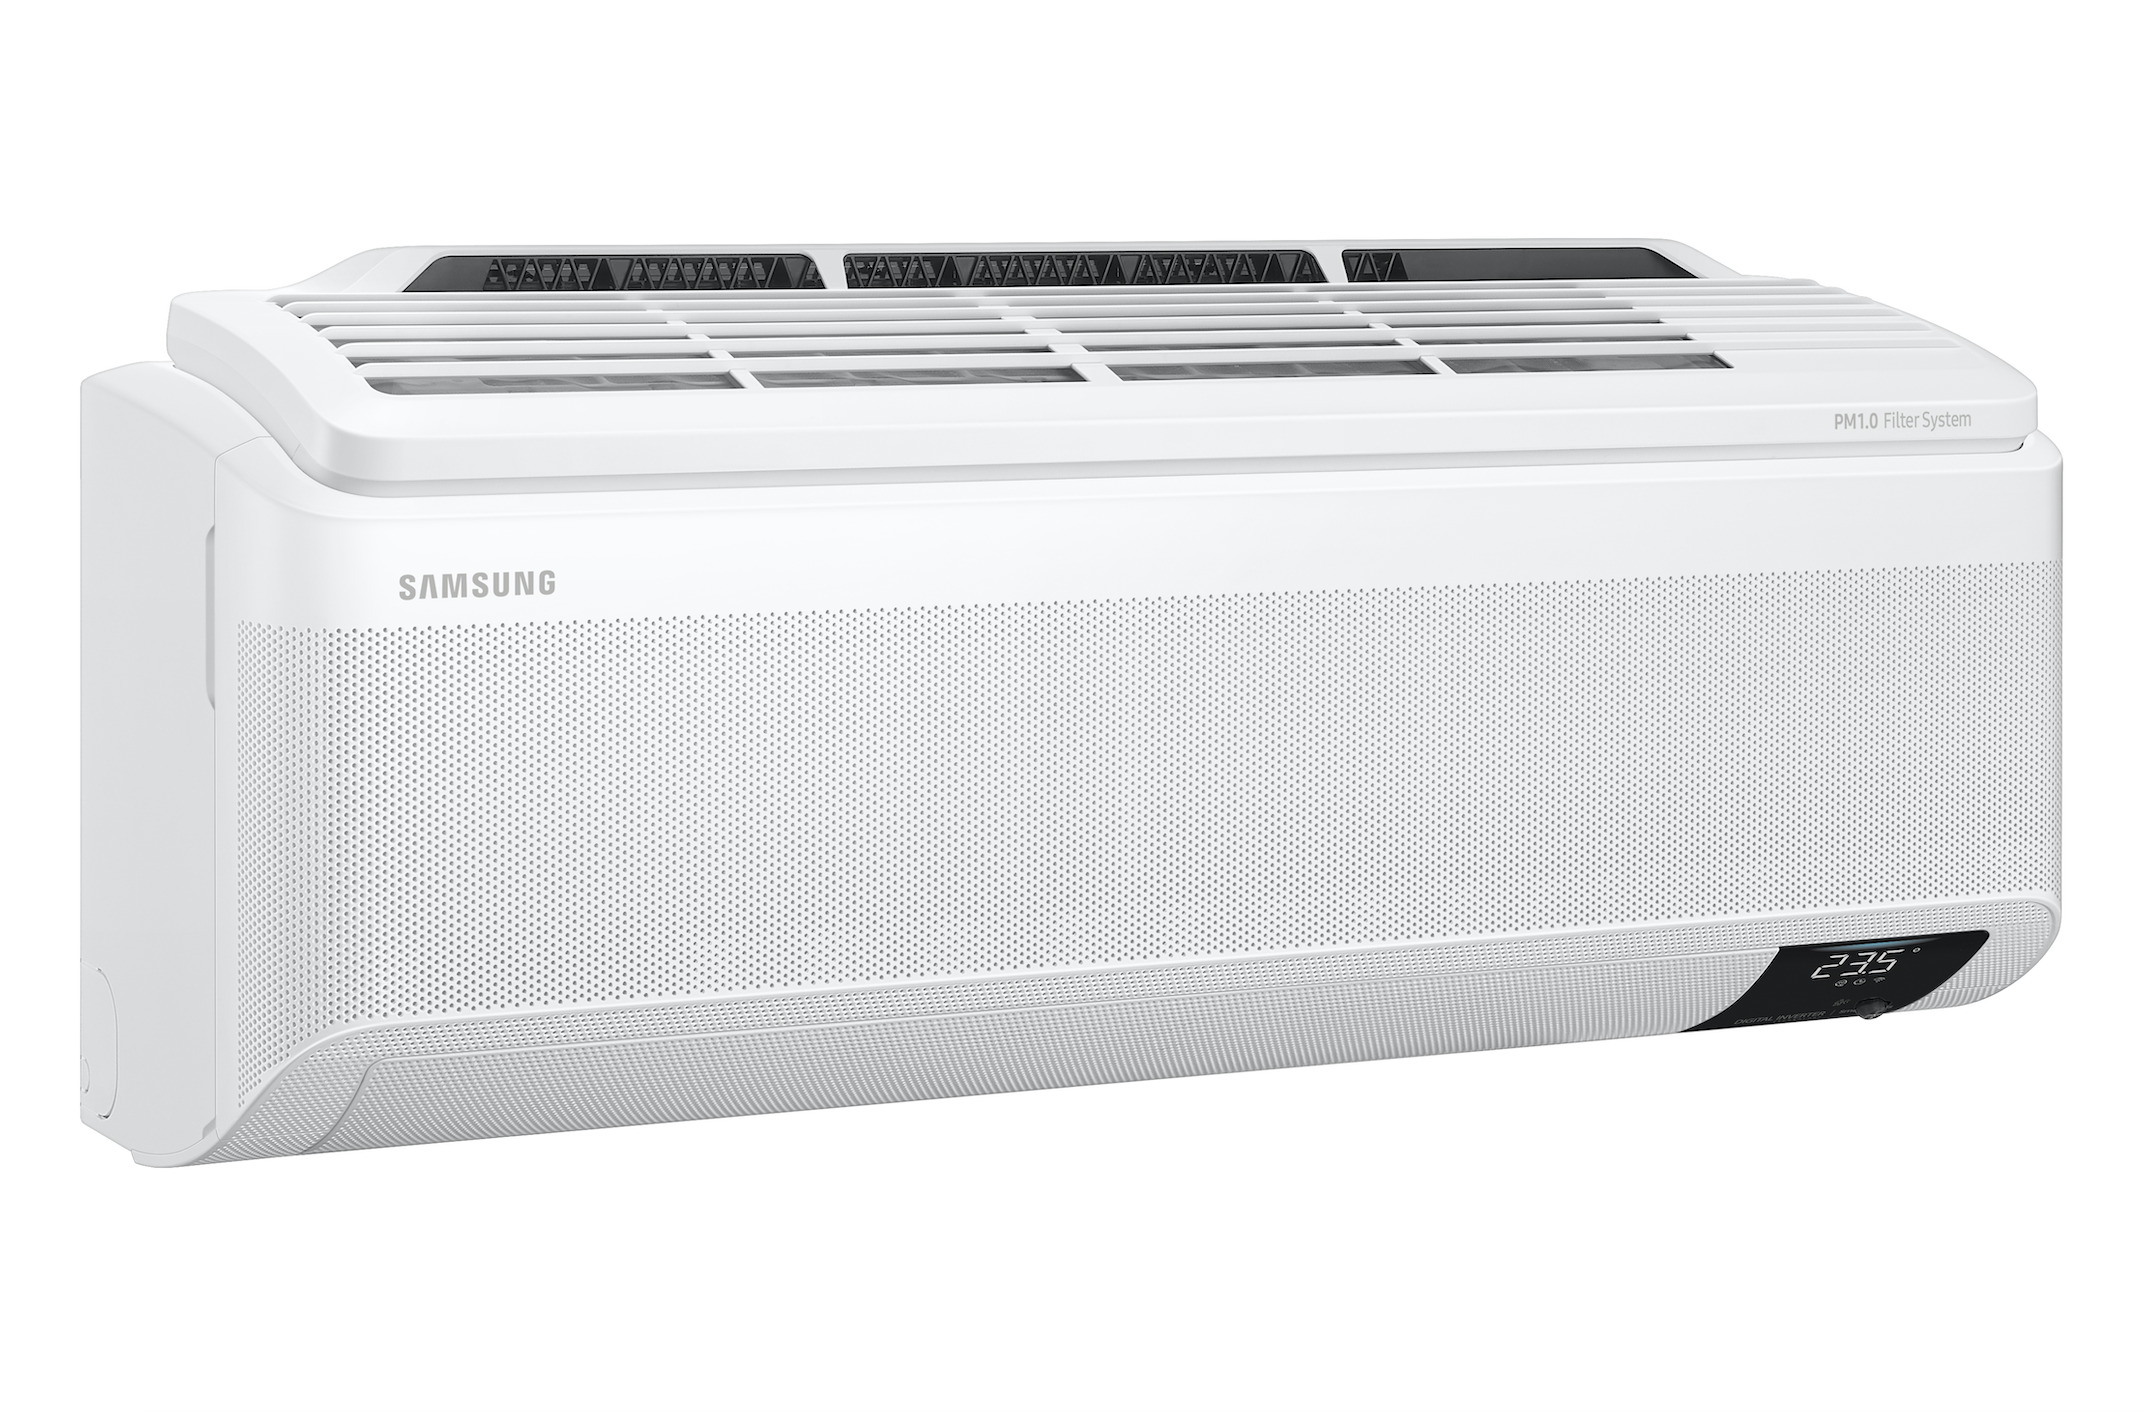 Samsung extends WindFreeTM wall-mounted range with PM1.0 air purification filter for residential market